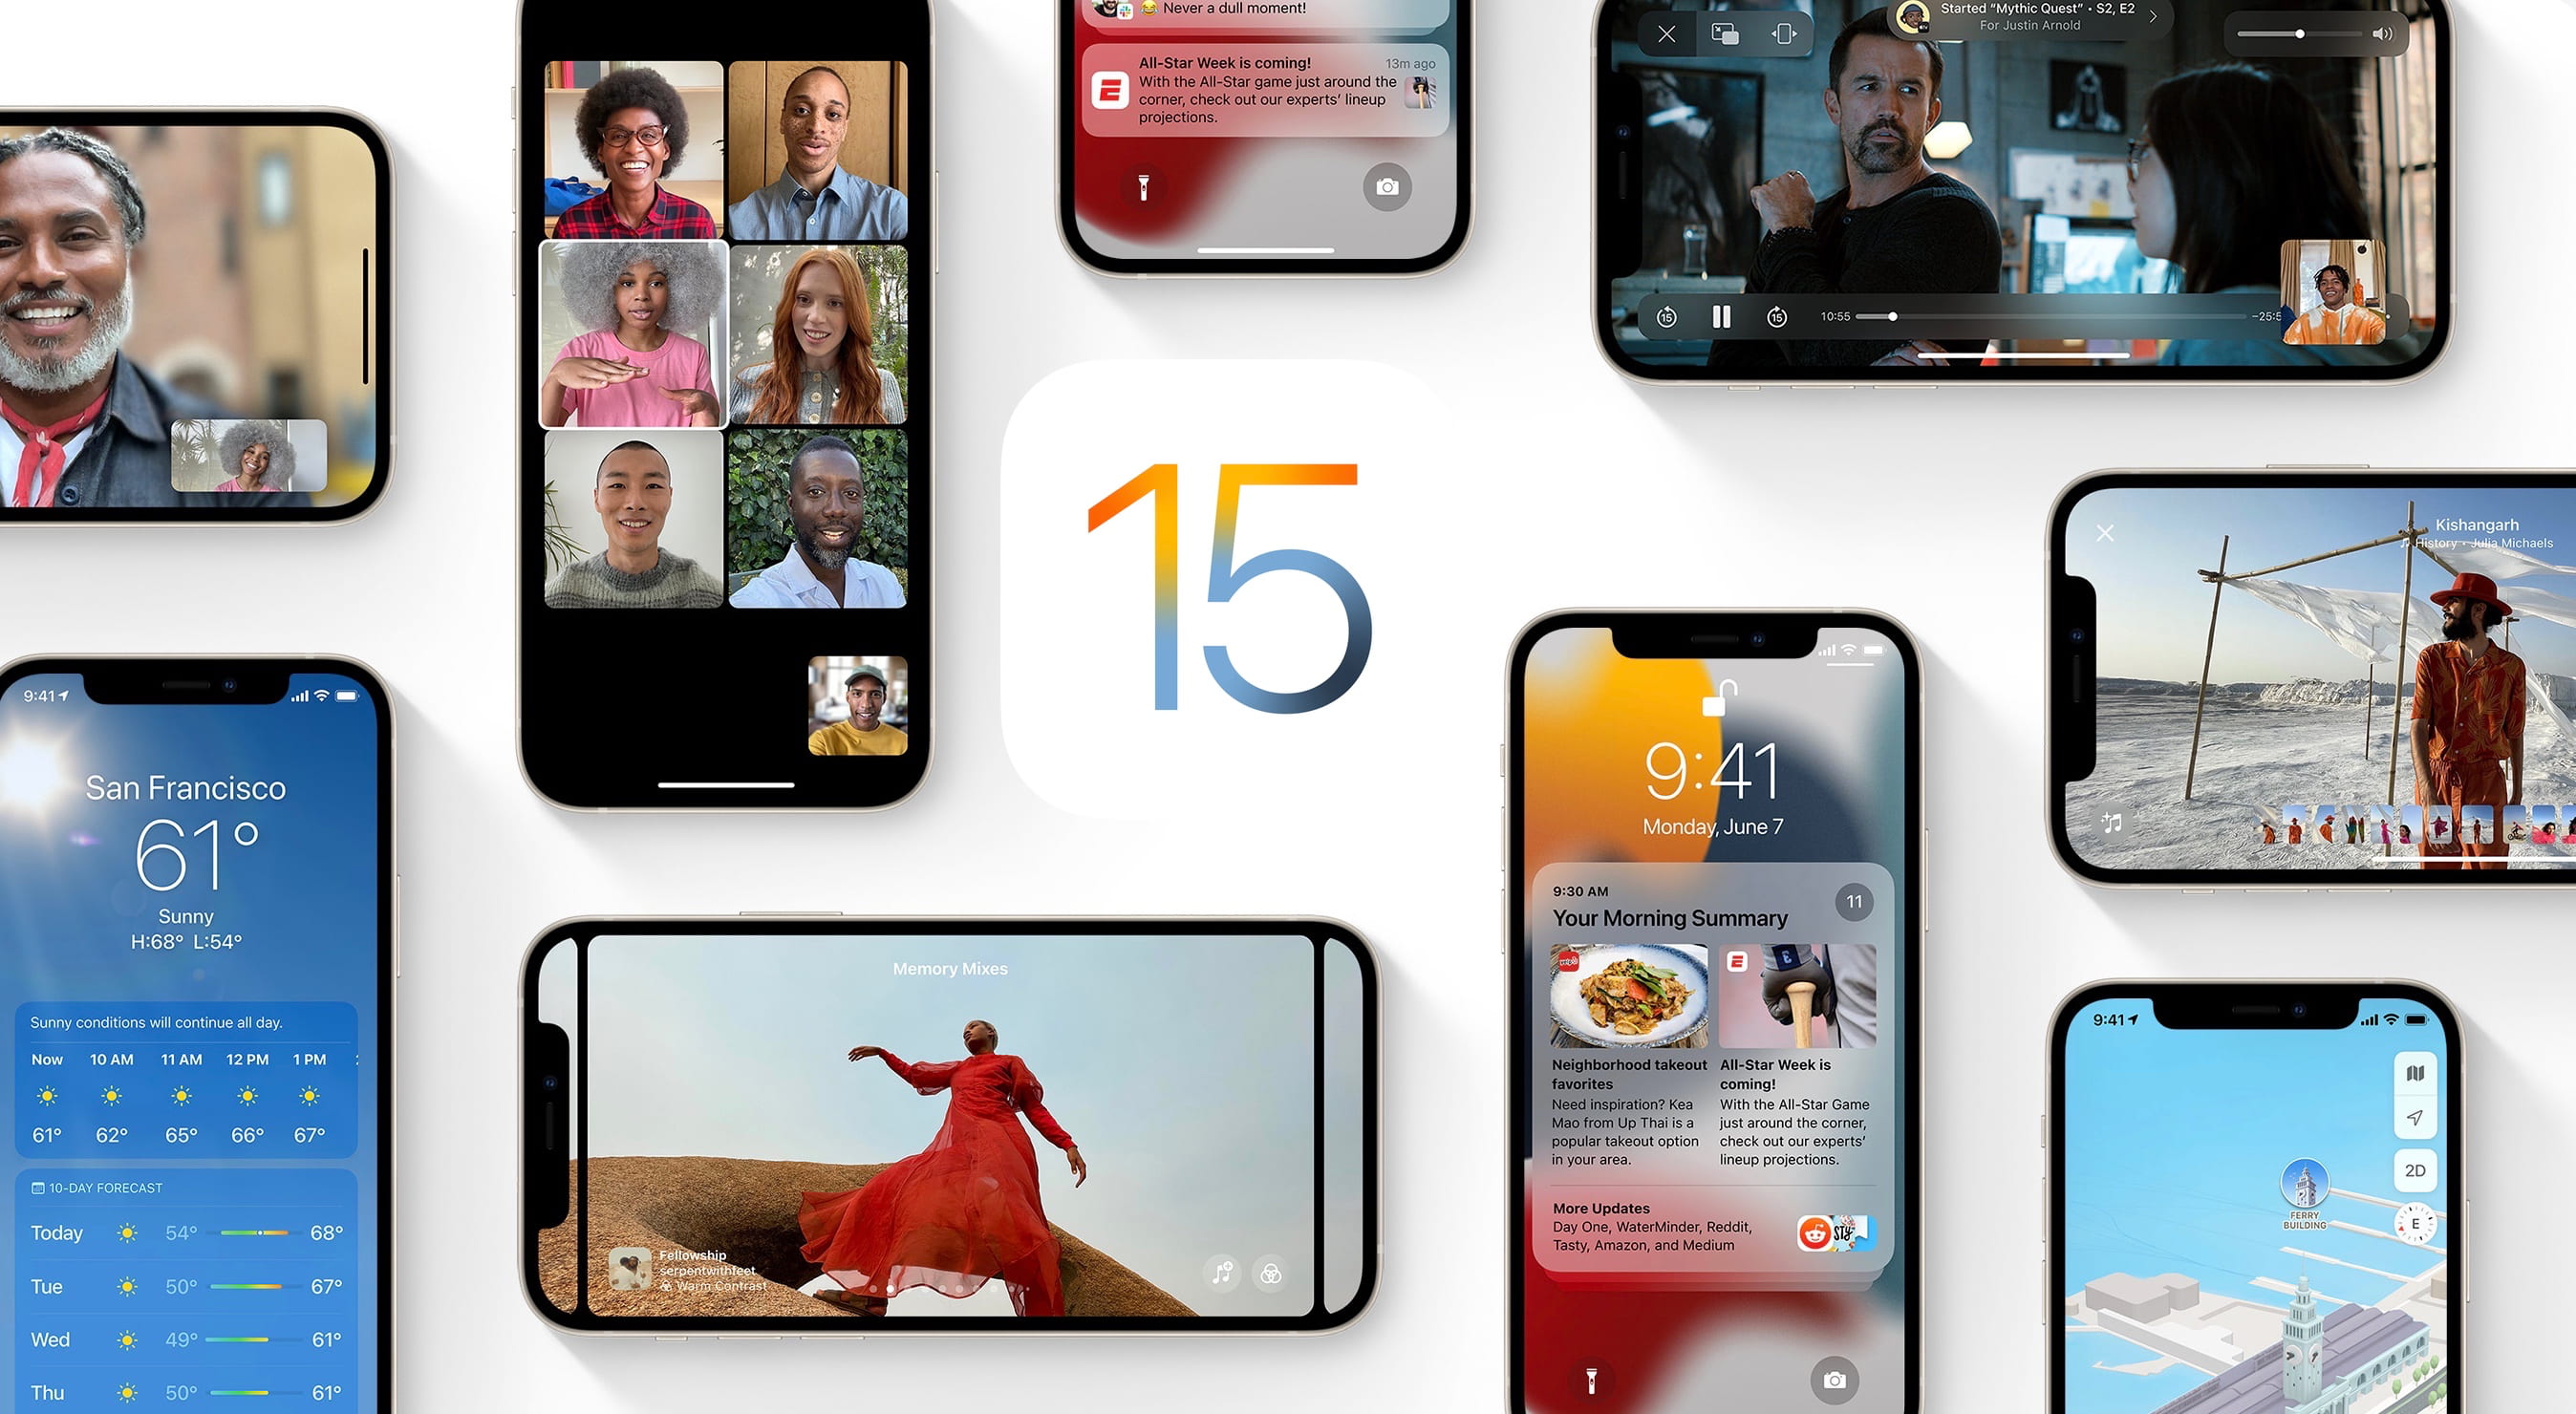 WWDC20 slide showing some of the key new iPhone features in iOS 15